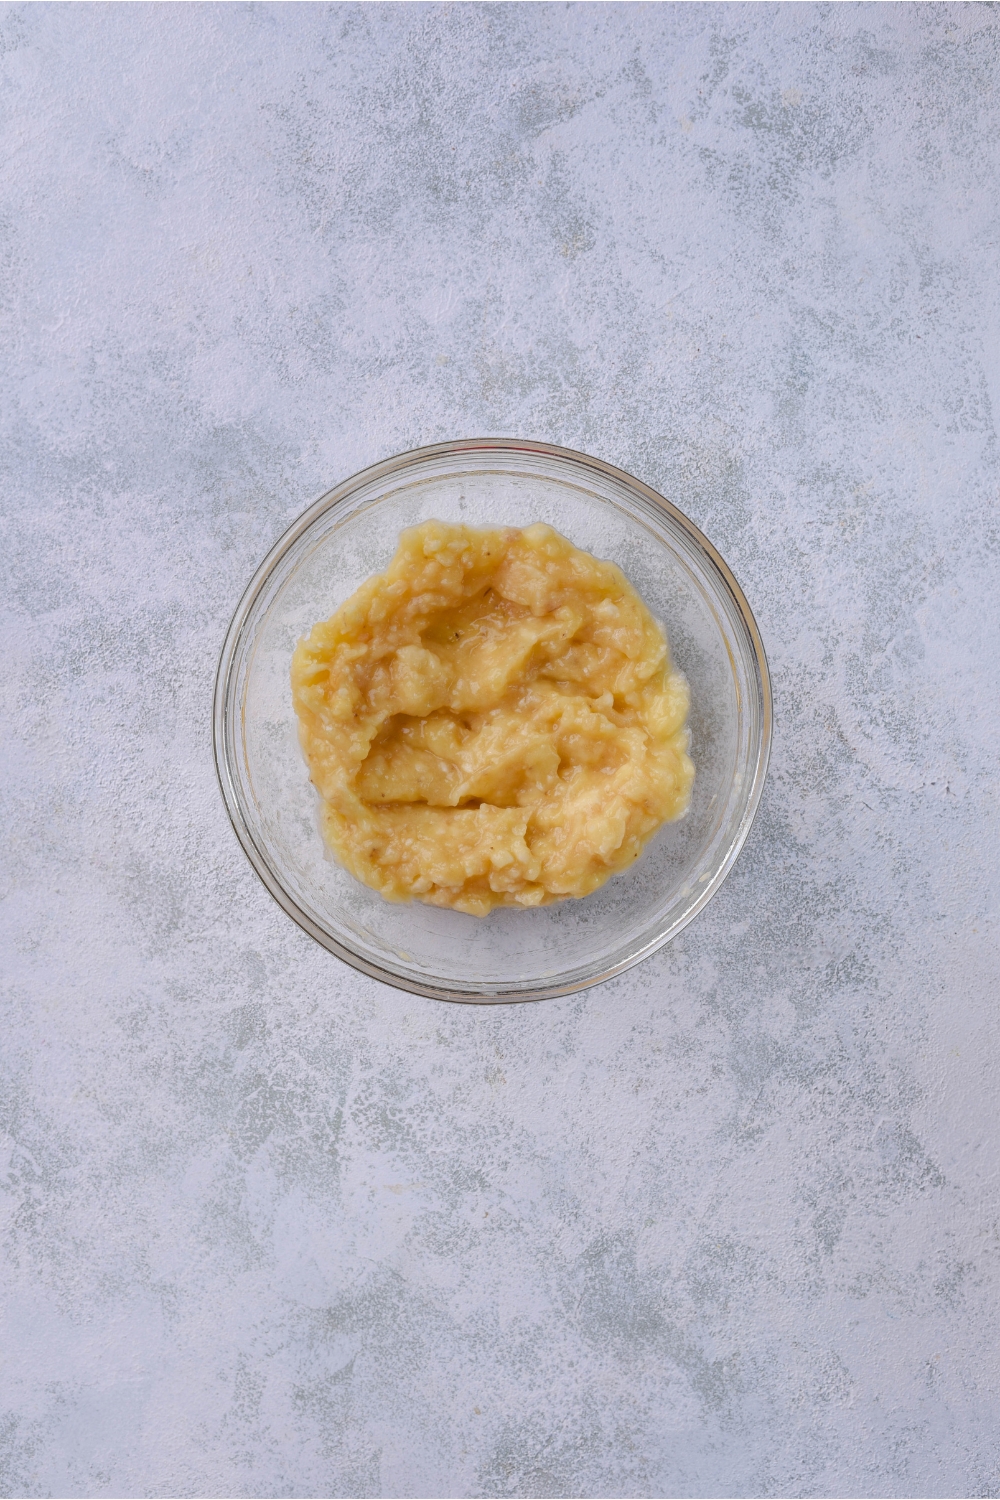 A clear bowl filled with mashed bananas.